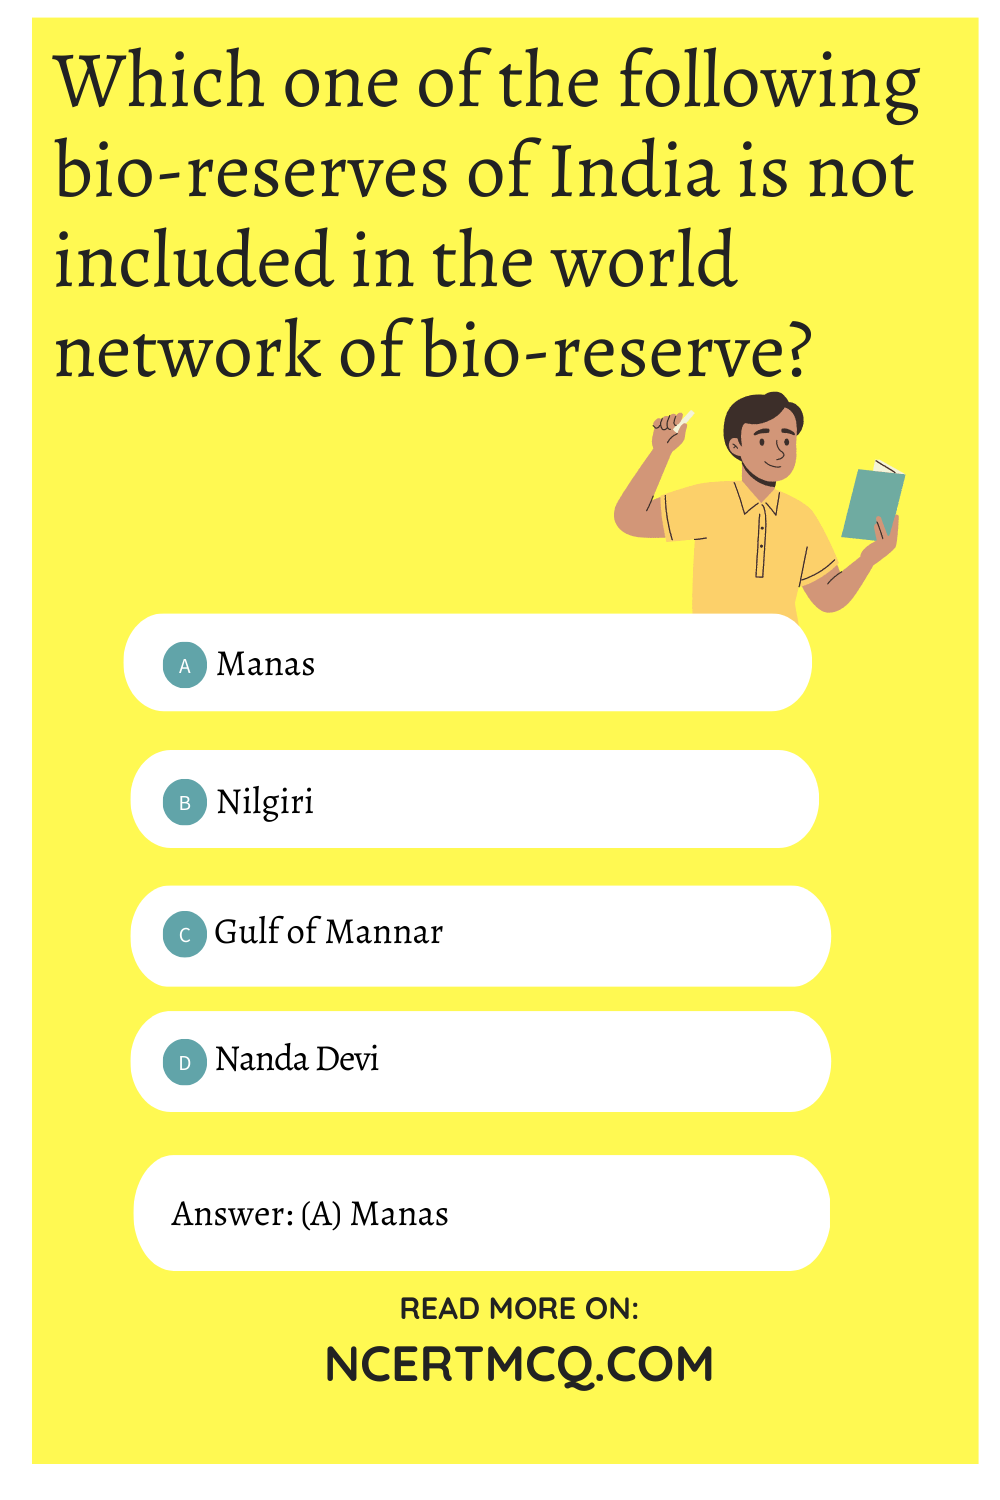 Which one of the following bio-reserves of India is not included in the world network of bio-reserve?